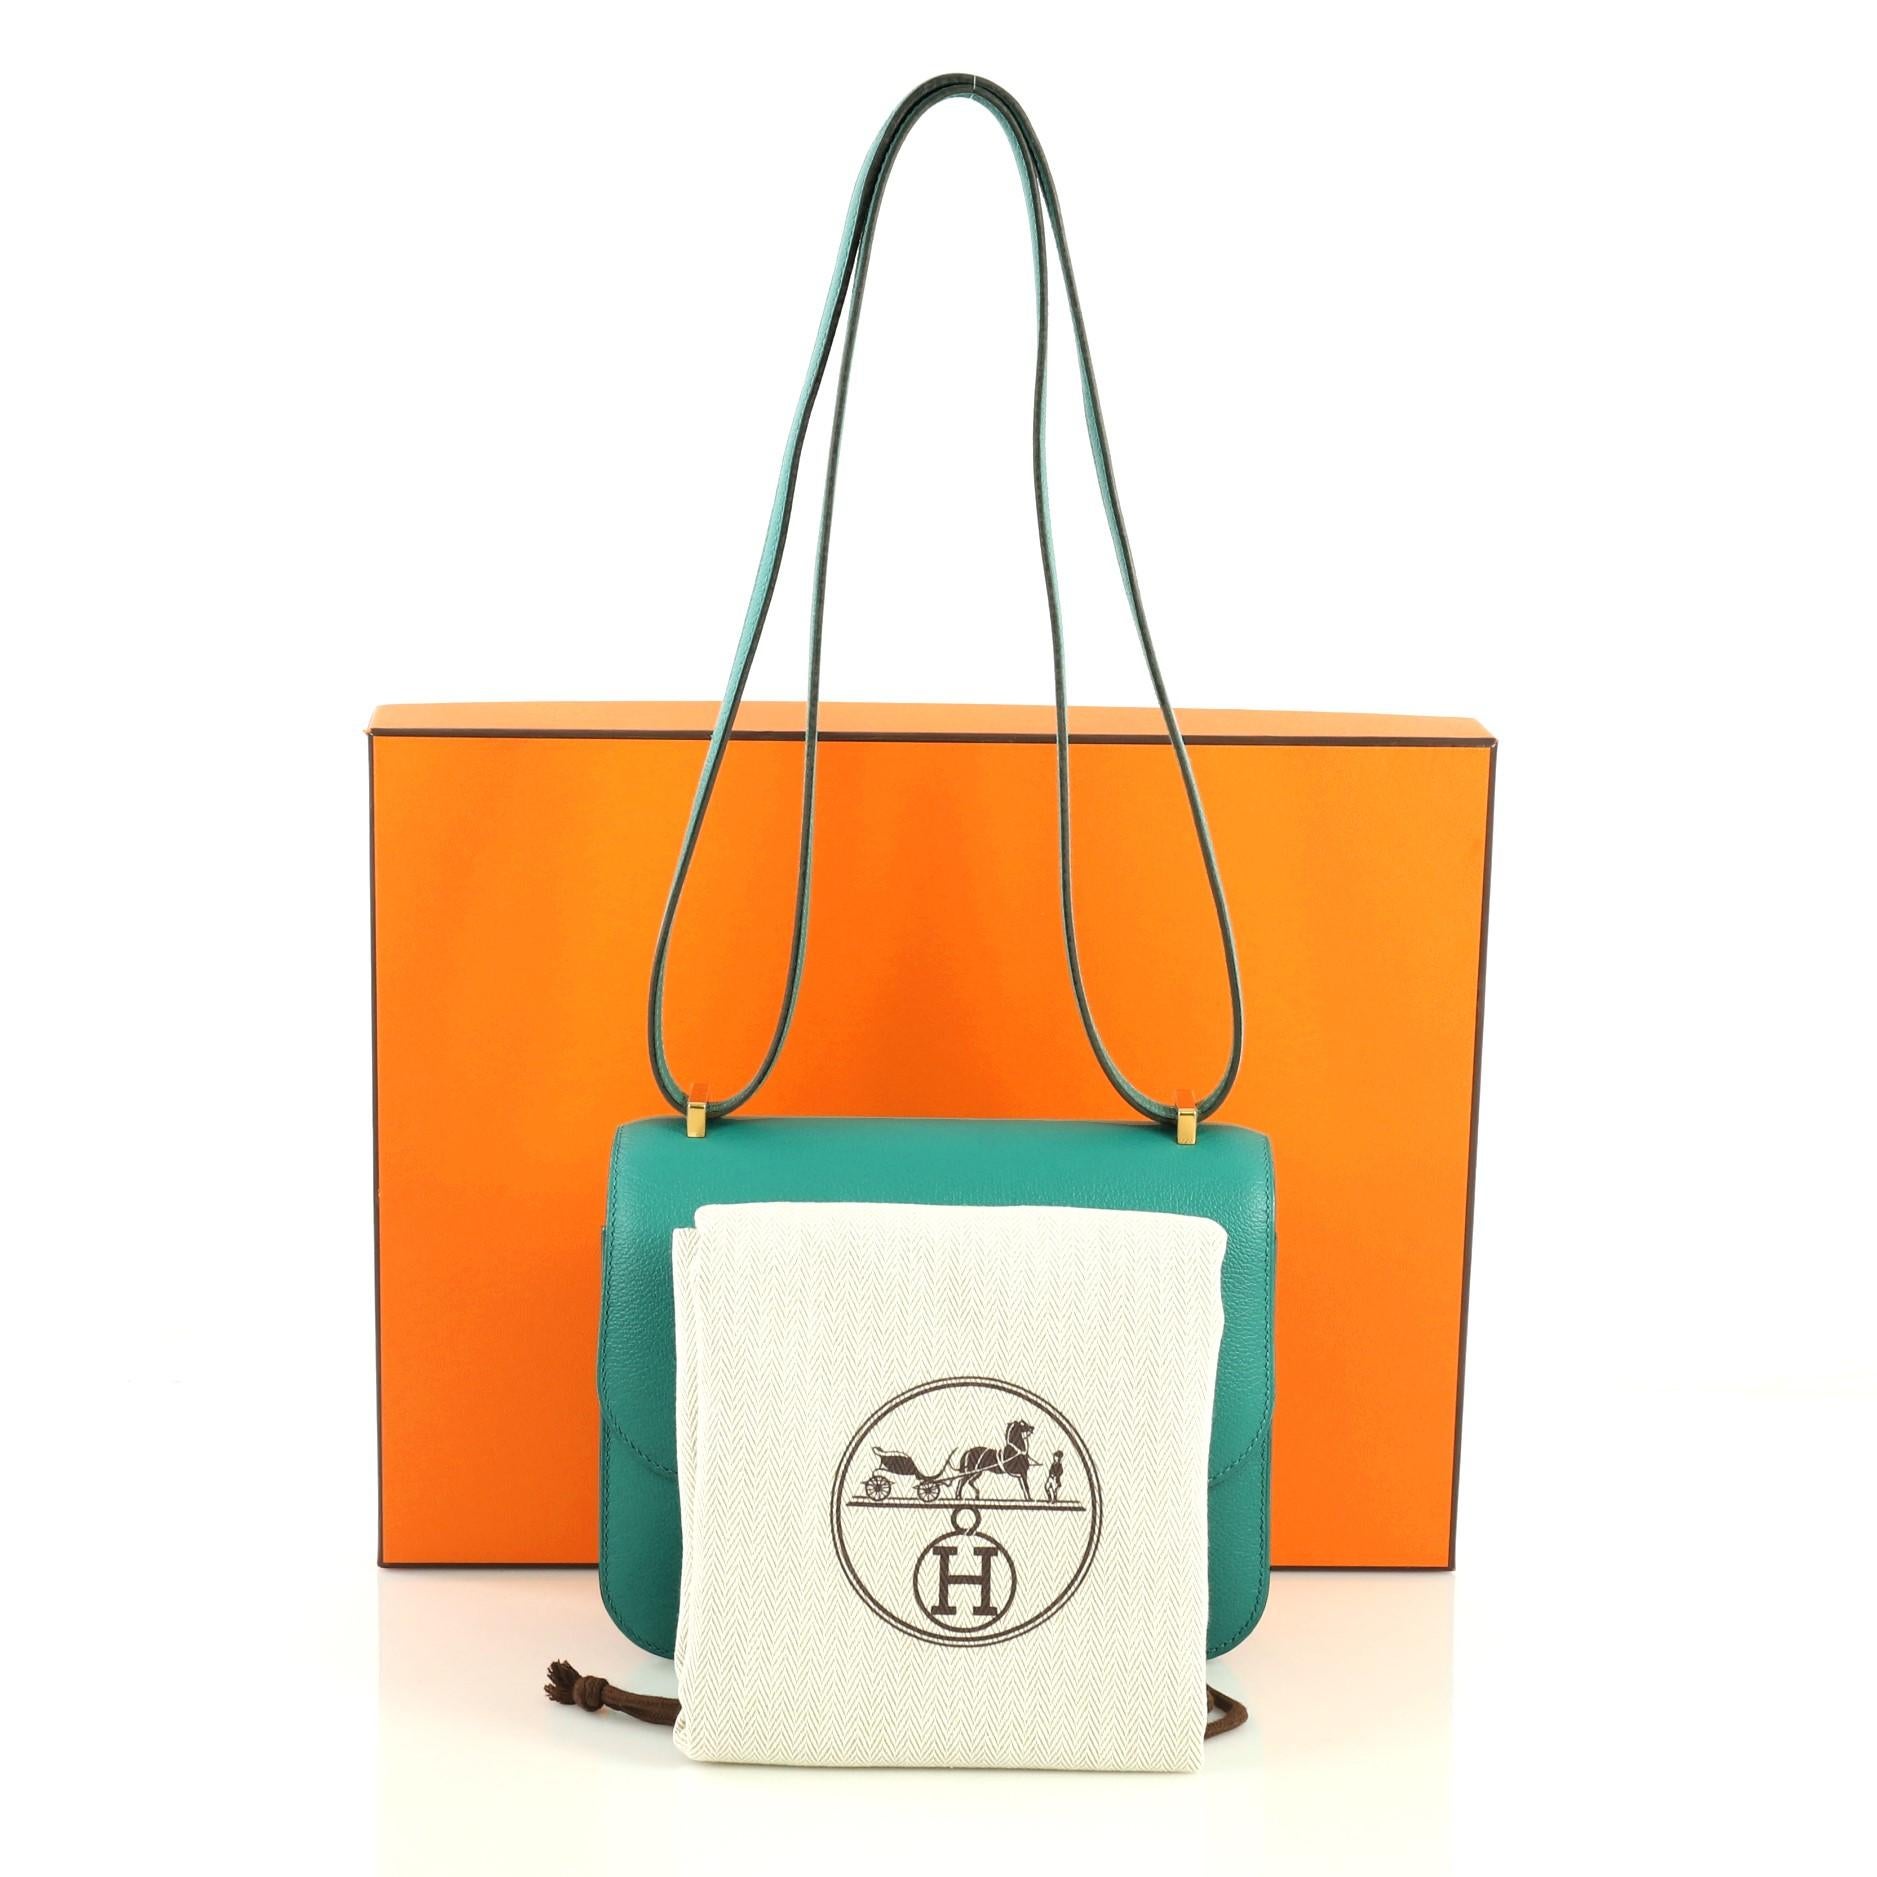 This Hermes Constance Handbag Evercolor 18, crafted from Vert Verone green Evercolor leather, features a long leather strap and gold hardware. Its push-lock closure opens to a Vert Verone green Agneau leather interior with two open compartments and